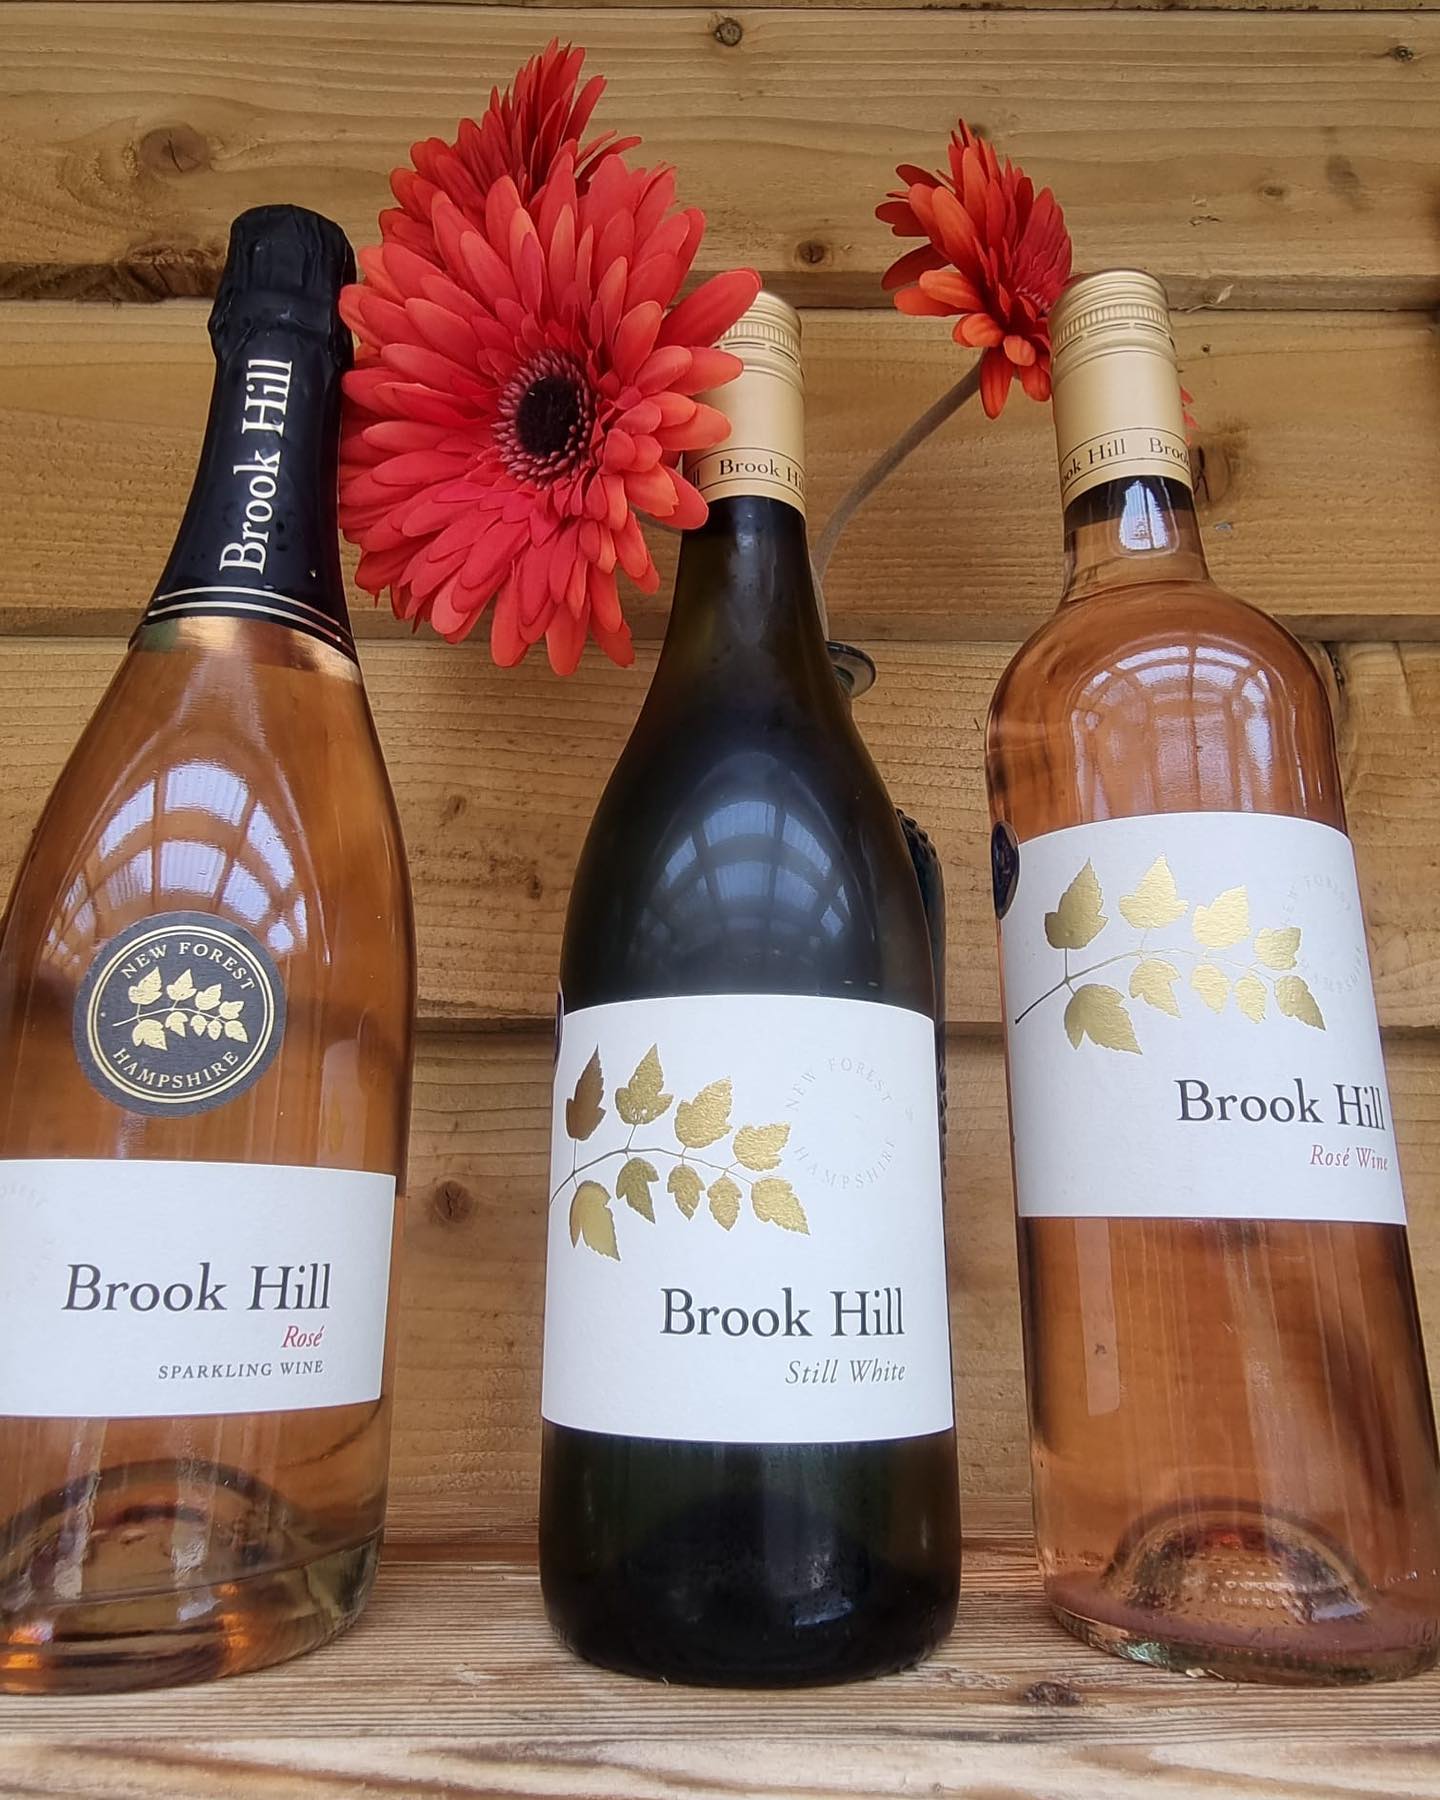 #suppliershoutout

We are very excited to be stocking Brook Hill wines based in Bramshaw.

Brook Hill is a family-run vineyard in the heart of the New Forest. The grapes are hand-picked, crushed and fermented in their own winery to make a range of award-winning still and sparkling wines.

#Brookhillvineyard #localwine #headlandsfarmcoffeeshop #coffeeshopinwellow #whatsonromsey #sparklingwine #whitewine #handpicked